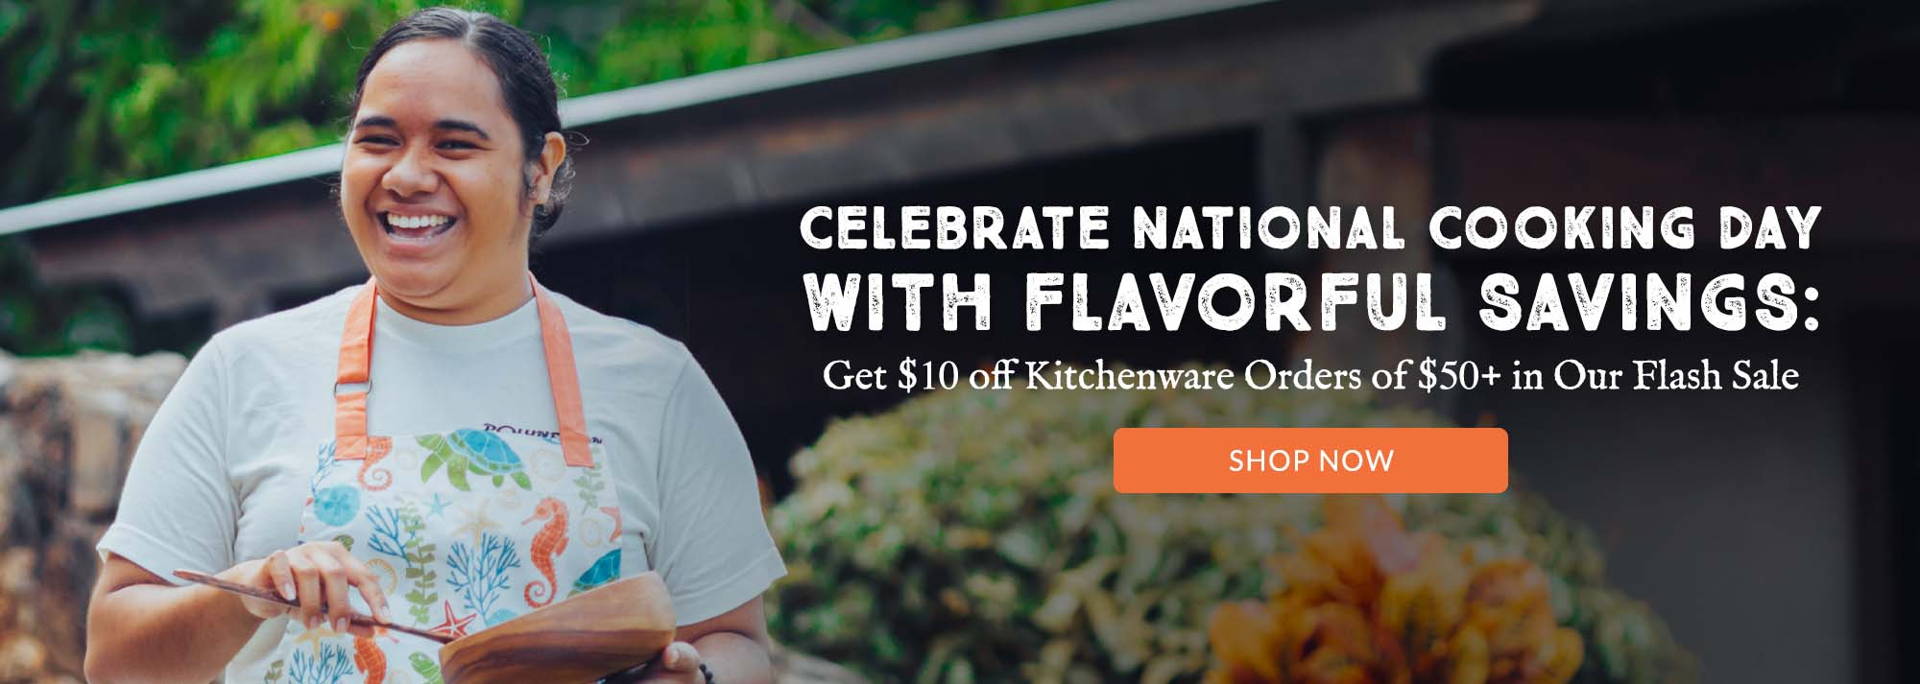 Celebrate National Cooking Day with Flavorful Savings: Get $10 off Kitchenware Orders $50+ in Our Flash Sale!